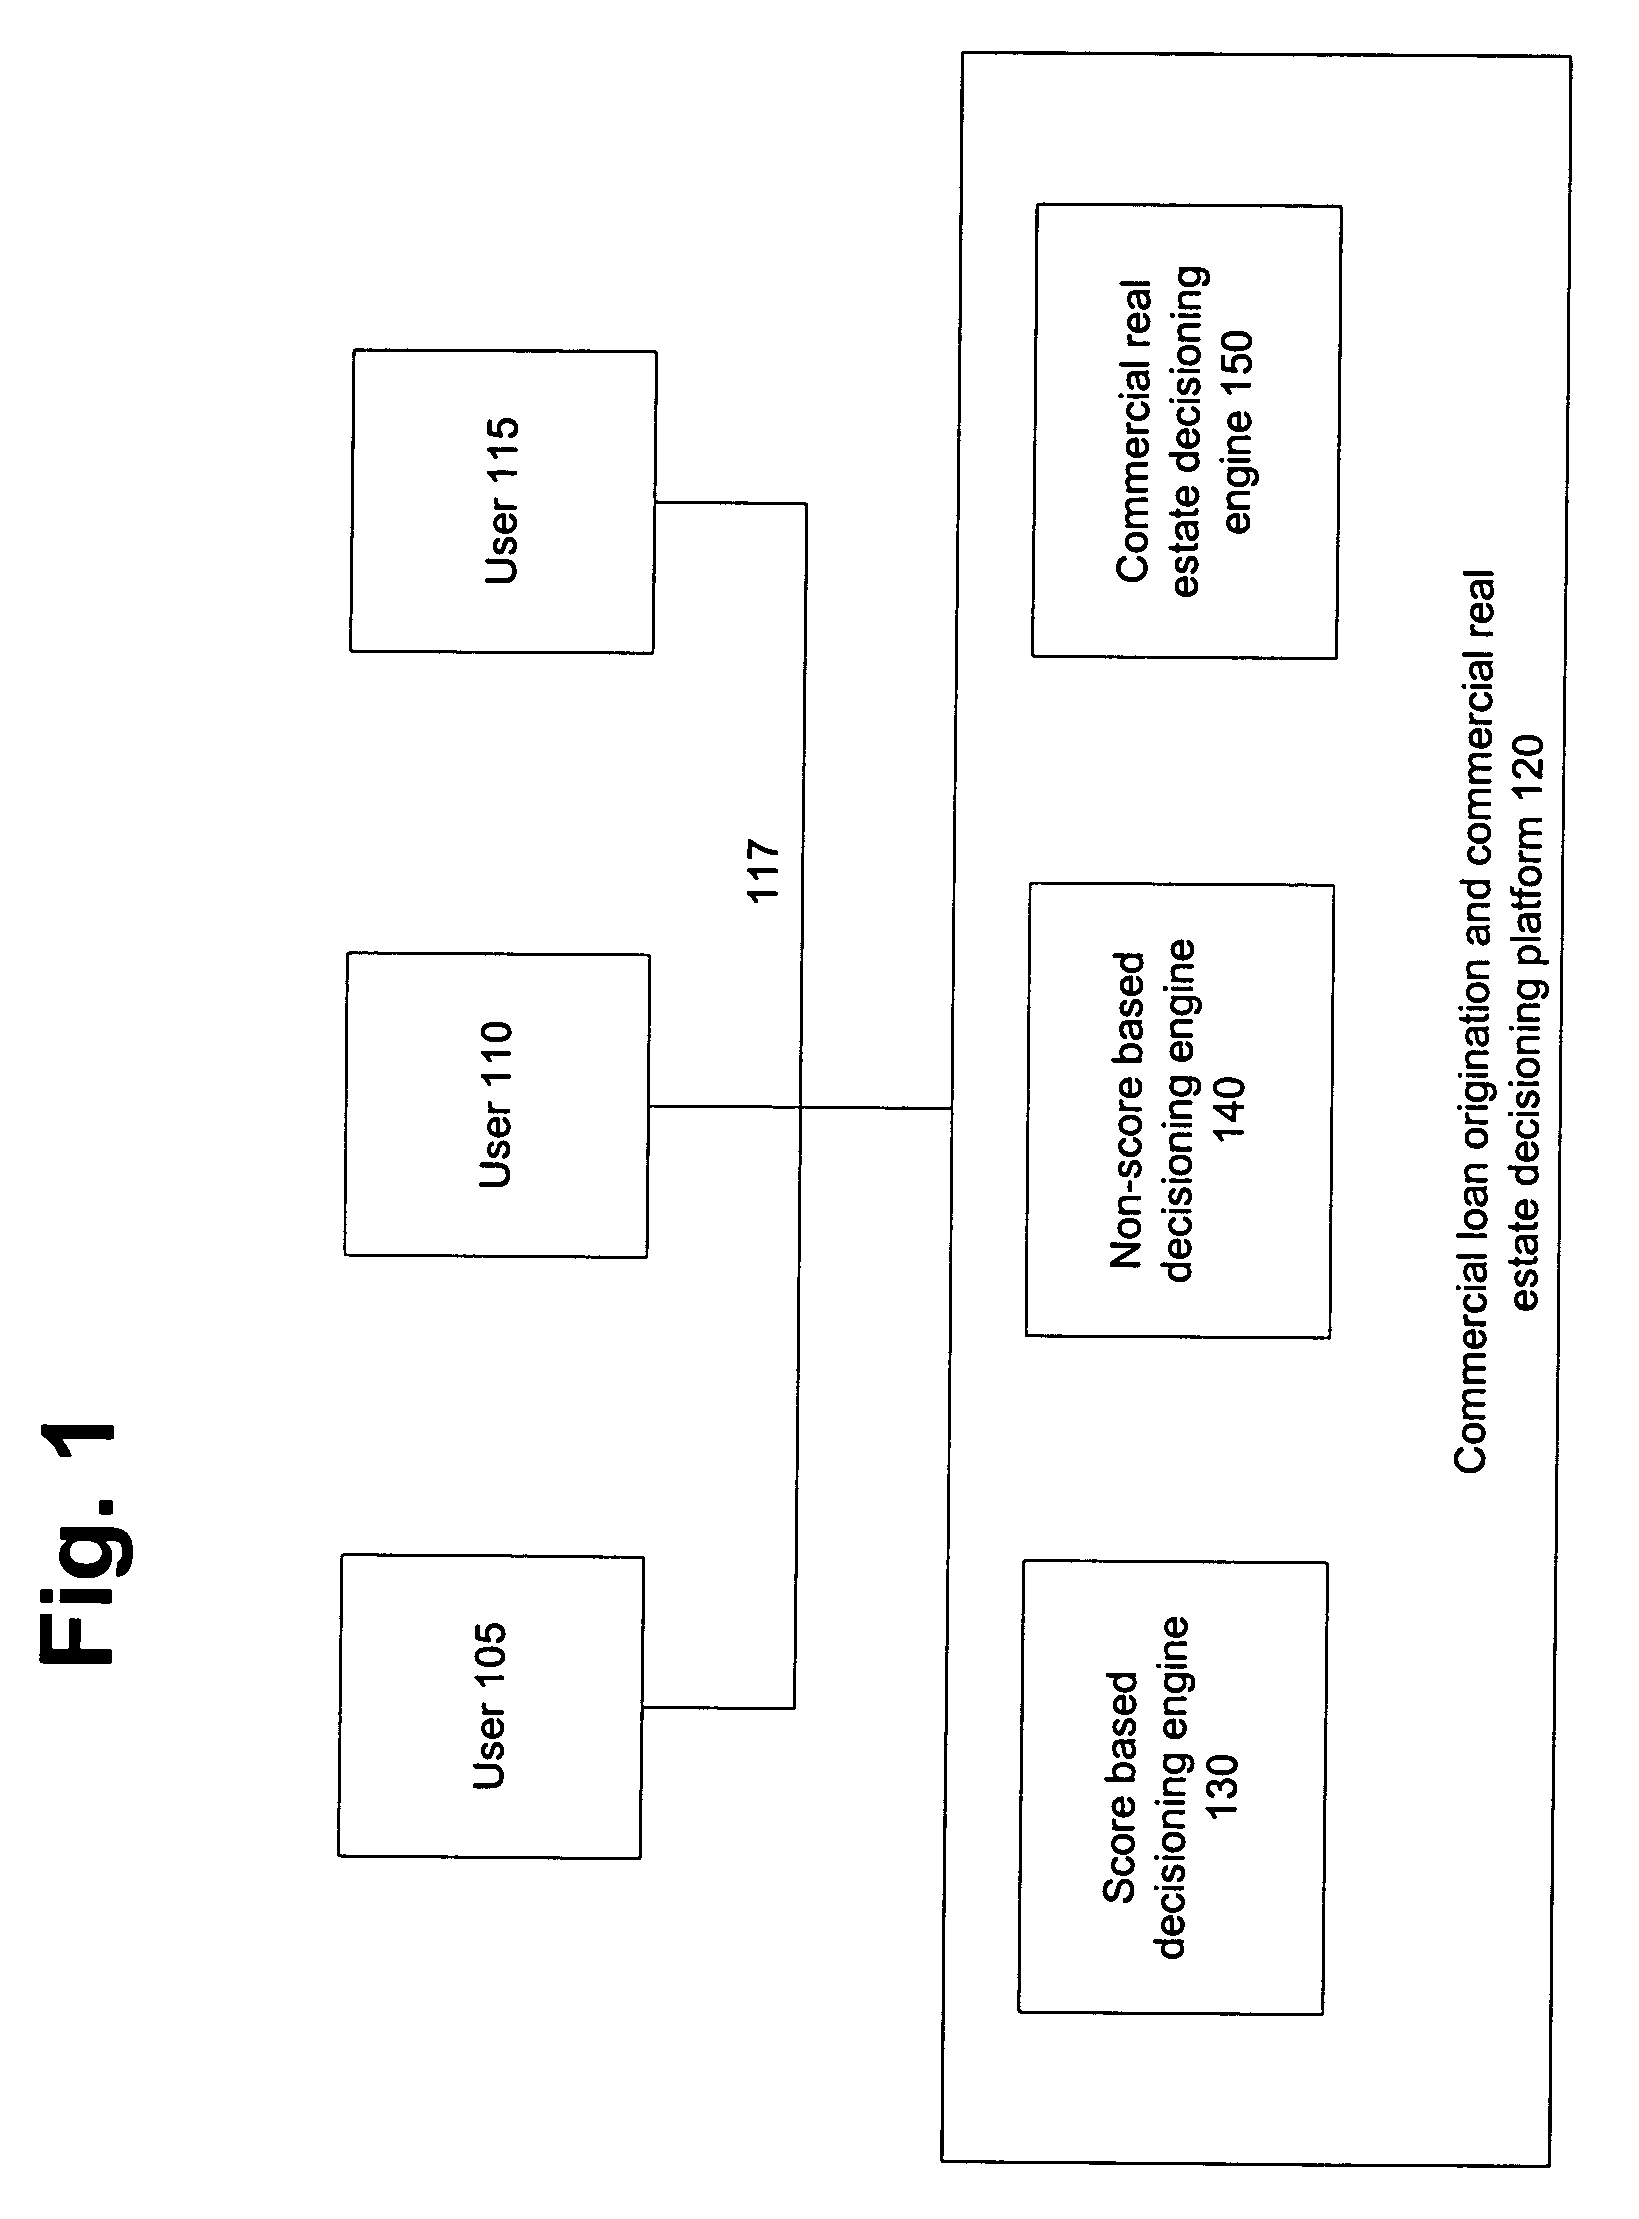 System and method for consolidation of commercial and professional financial underwriting